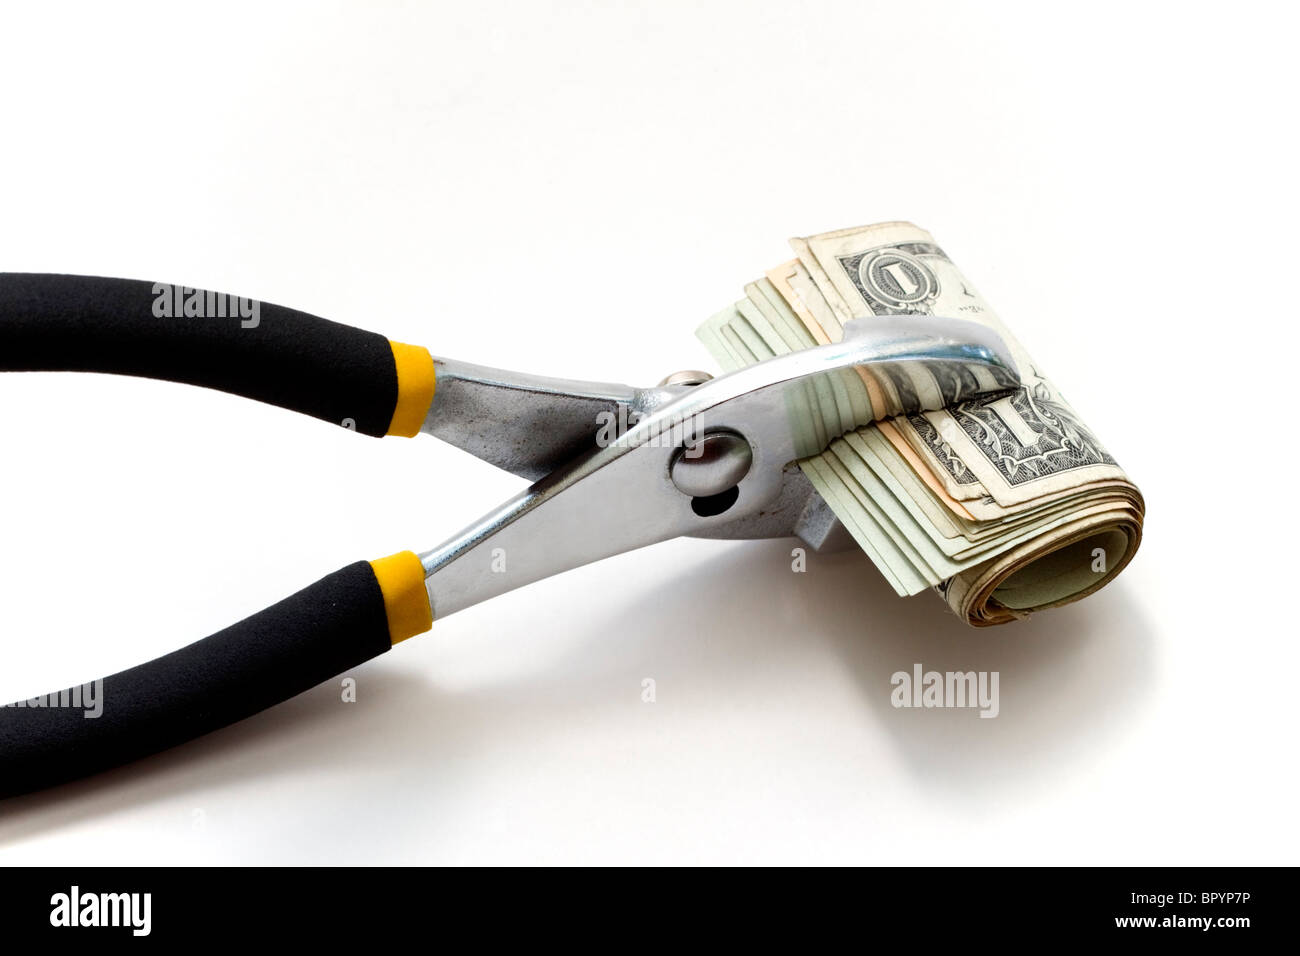 A roll of money being squeezed, conceptual image illustrating trouble in financial markets Stock Photo